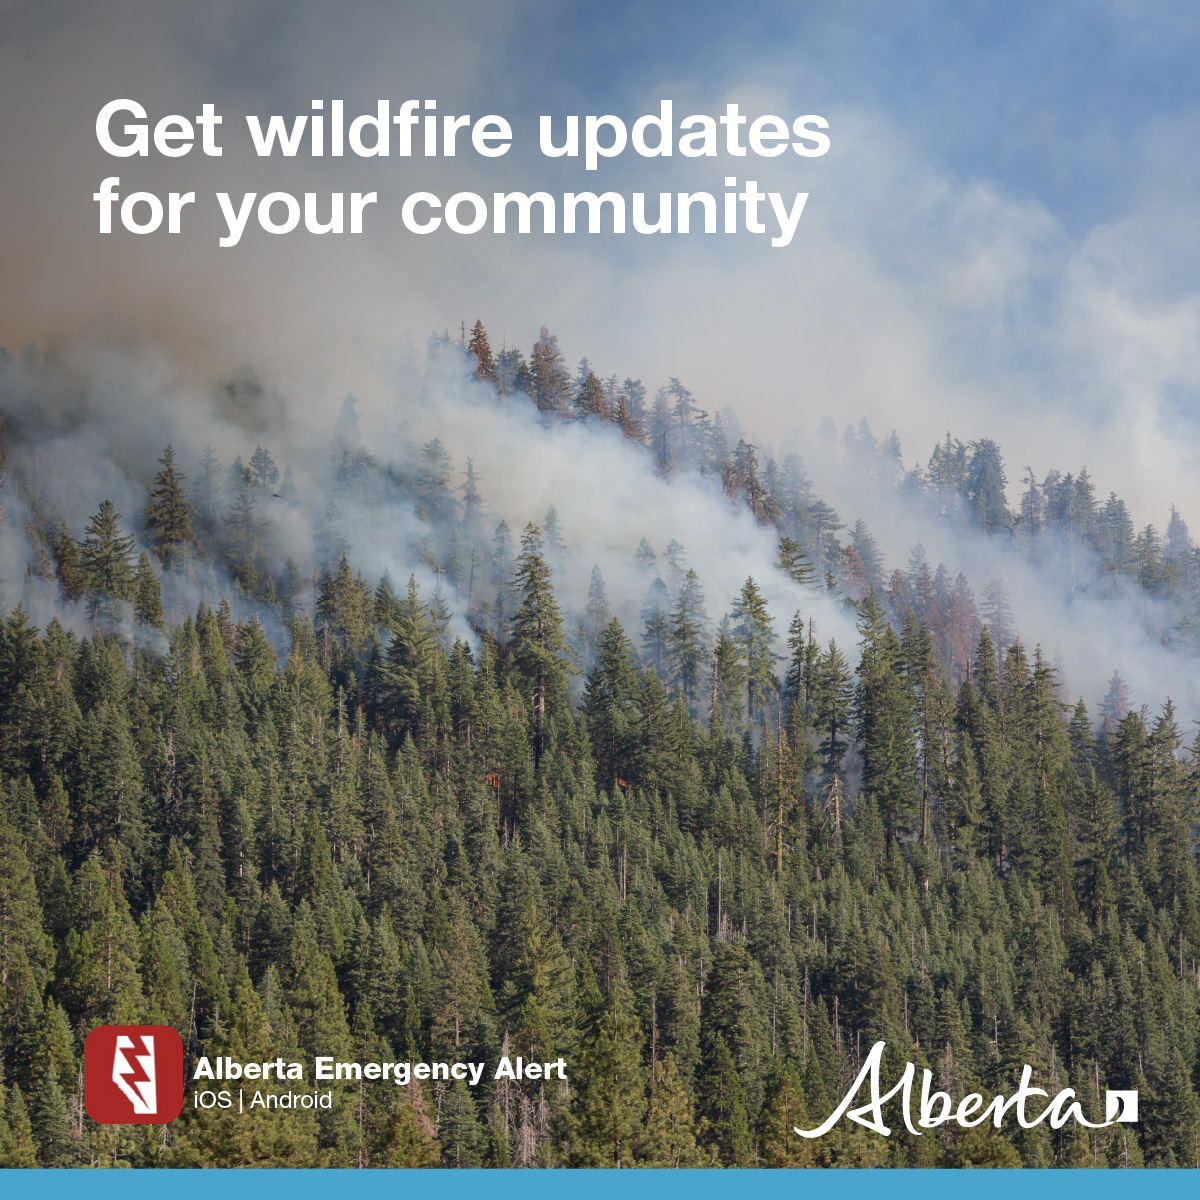 Wildfires are unpredictable. Make sure you have the latest emergency info for your community. Download the Alberta Emergency Alert app for iOS and Android. #ABWildfire